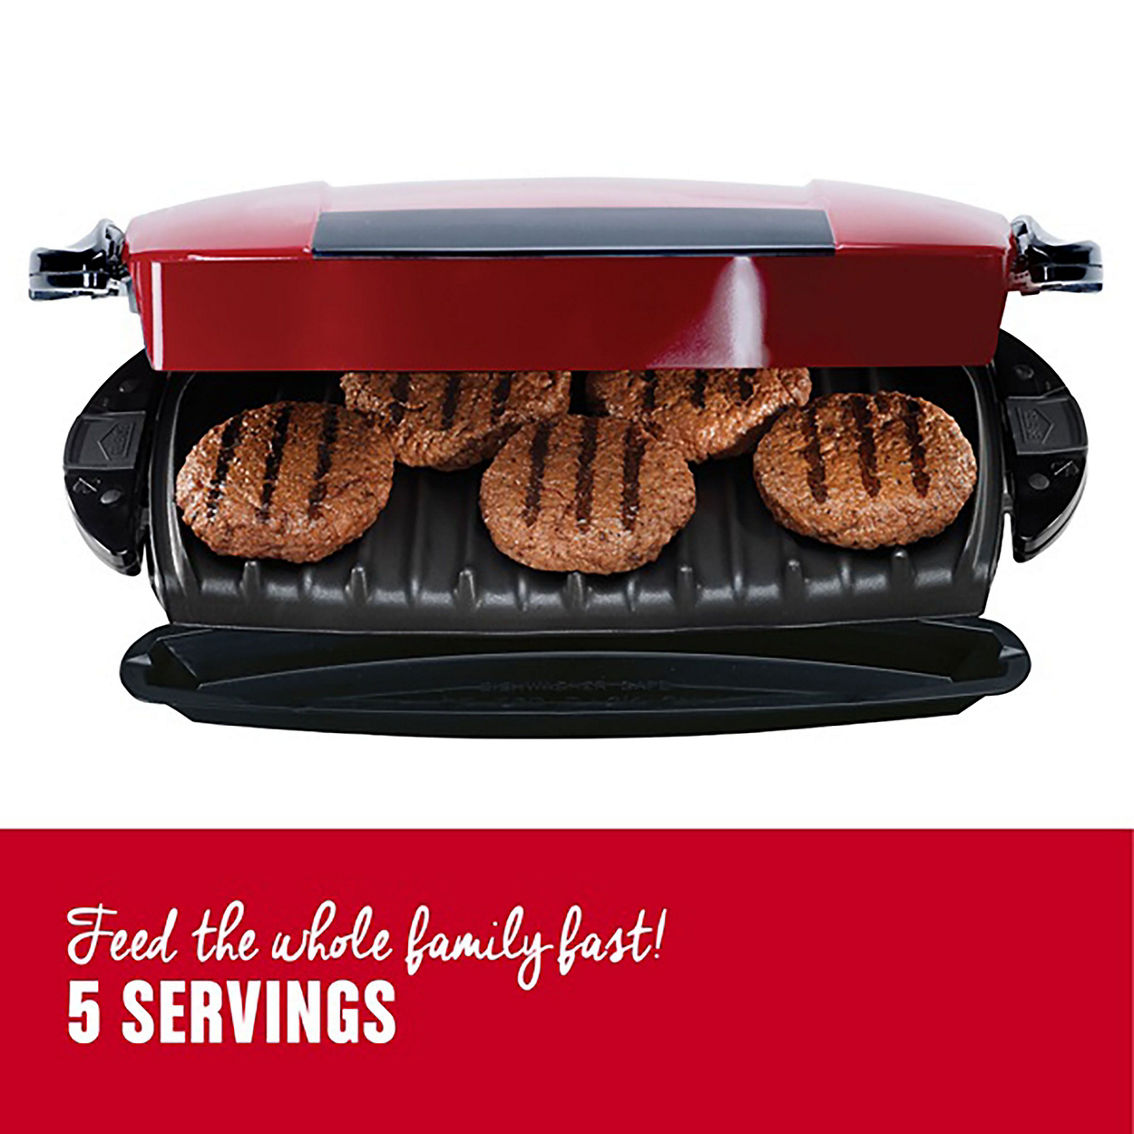 George Foreman 5 Serving Removable Plate and Panini Grill in Red - Image 3 of 5